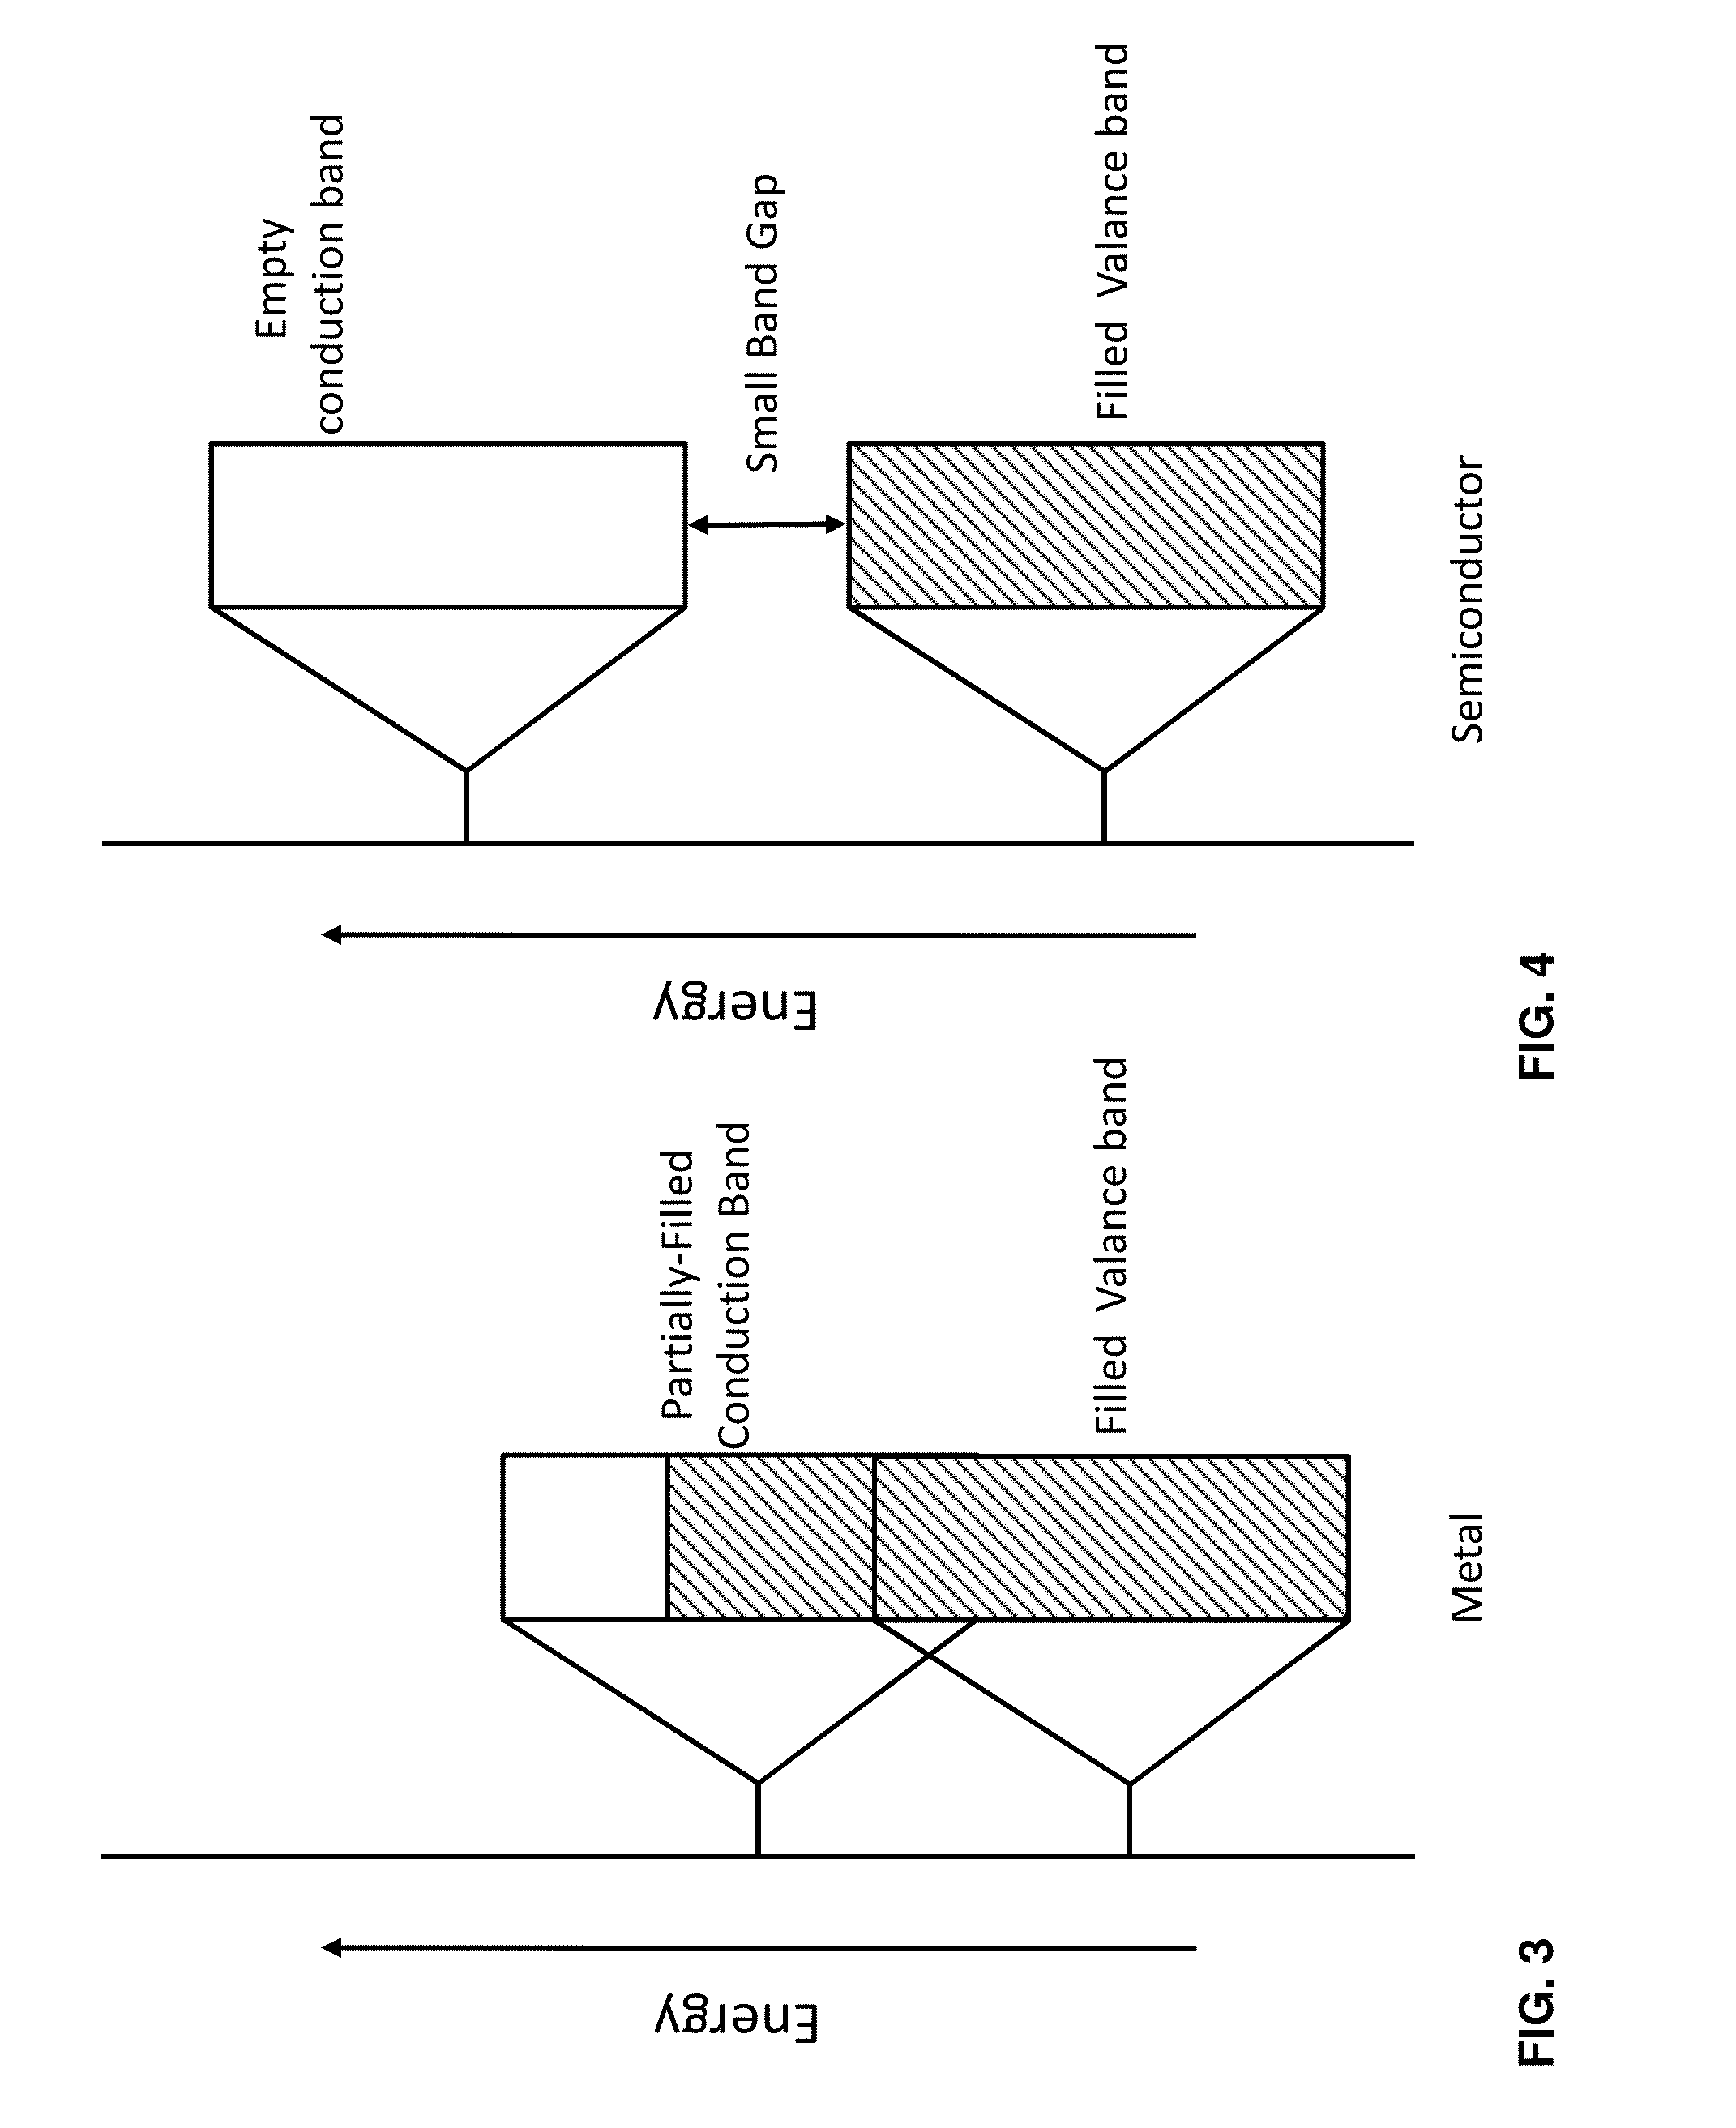 Use of LED or OLED Array to Implement Integrated Combinations of Touch Screen Tactile, Touch Gesture Sensor, Color Image Display, Hand-Image Gesture Sensor, Document Scanner, Secure Optical Data Exchange, and Fingerprint Processing Capabilities